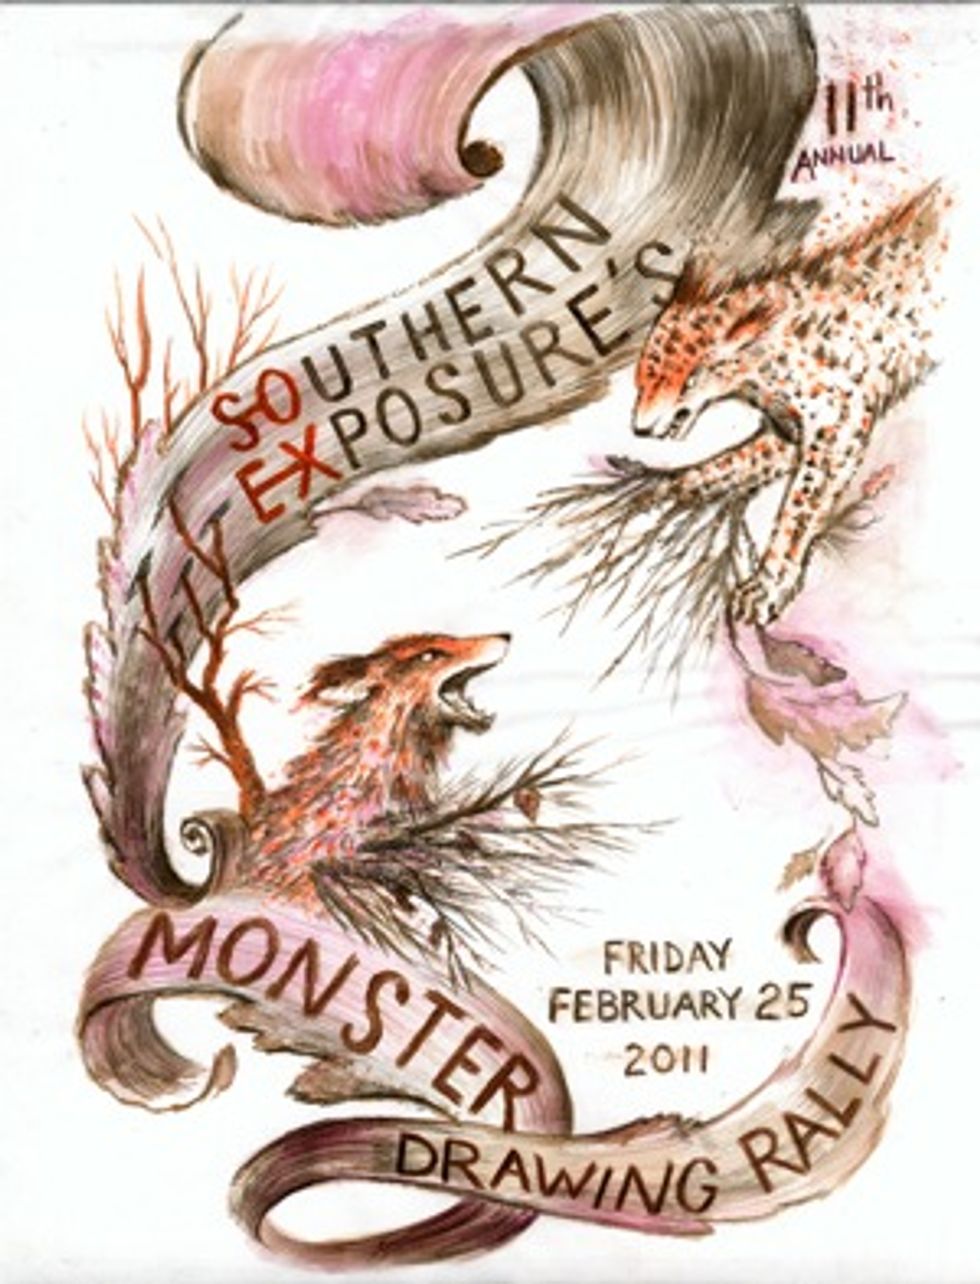 Southern Exposure's 11th Annual Monster Drawing Rally Bigger Than Ever